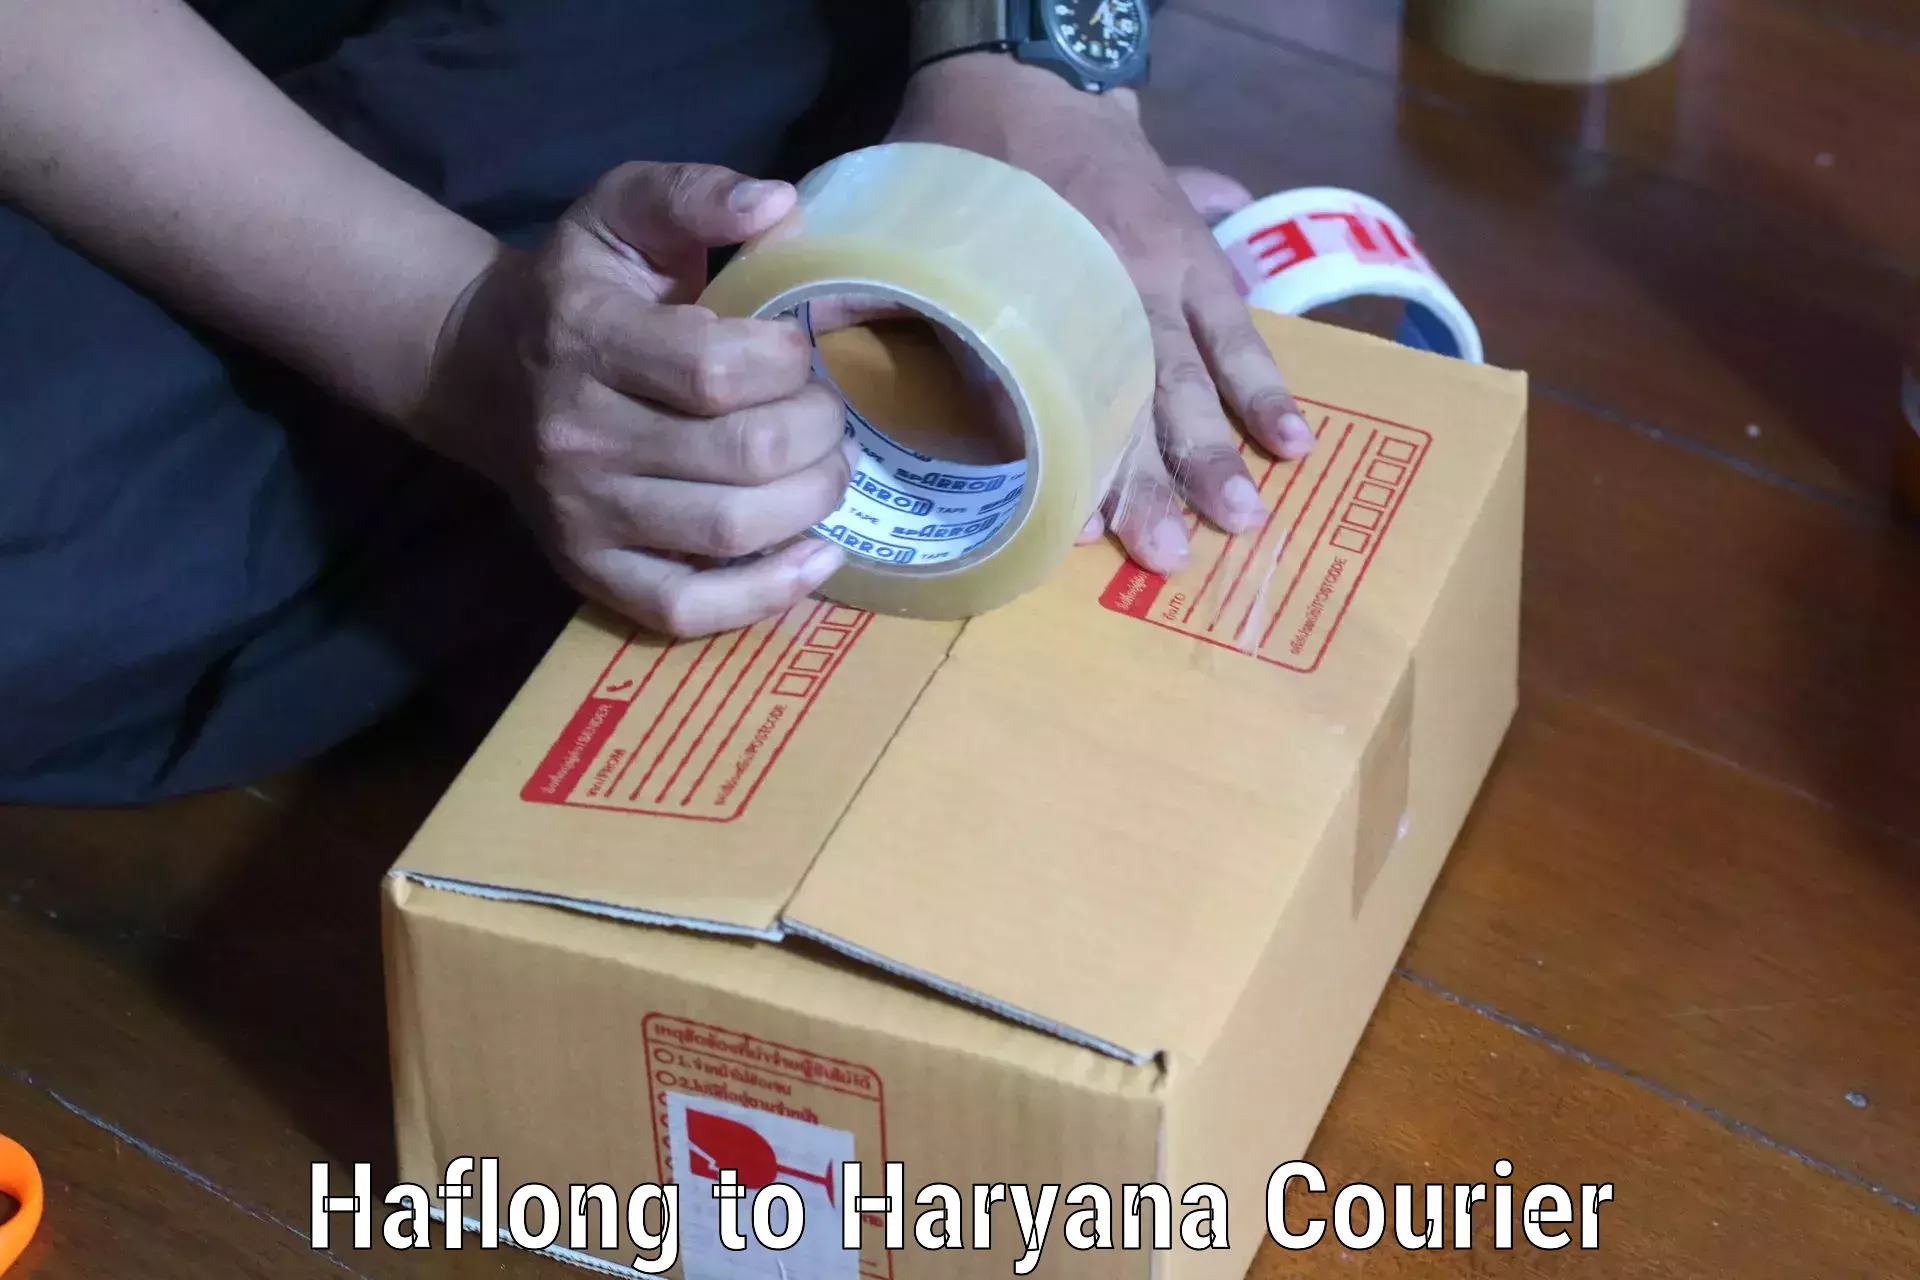 Express delivery network Haflong to Haryana